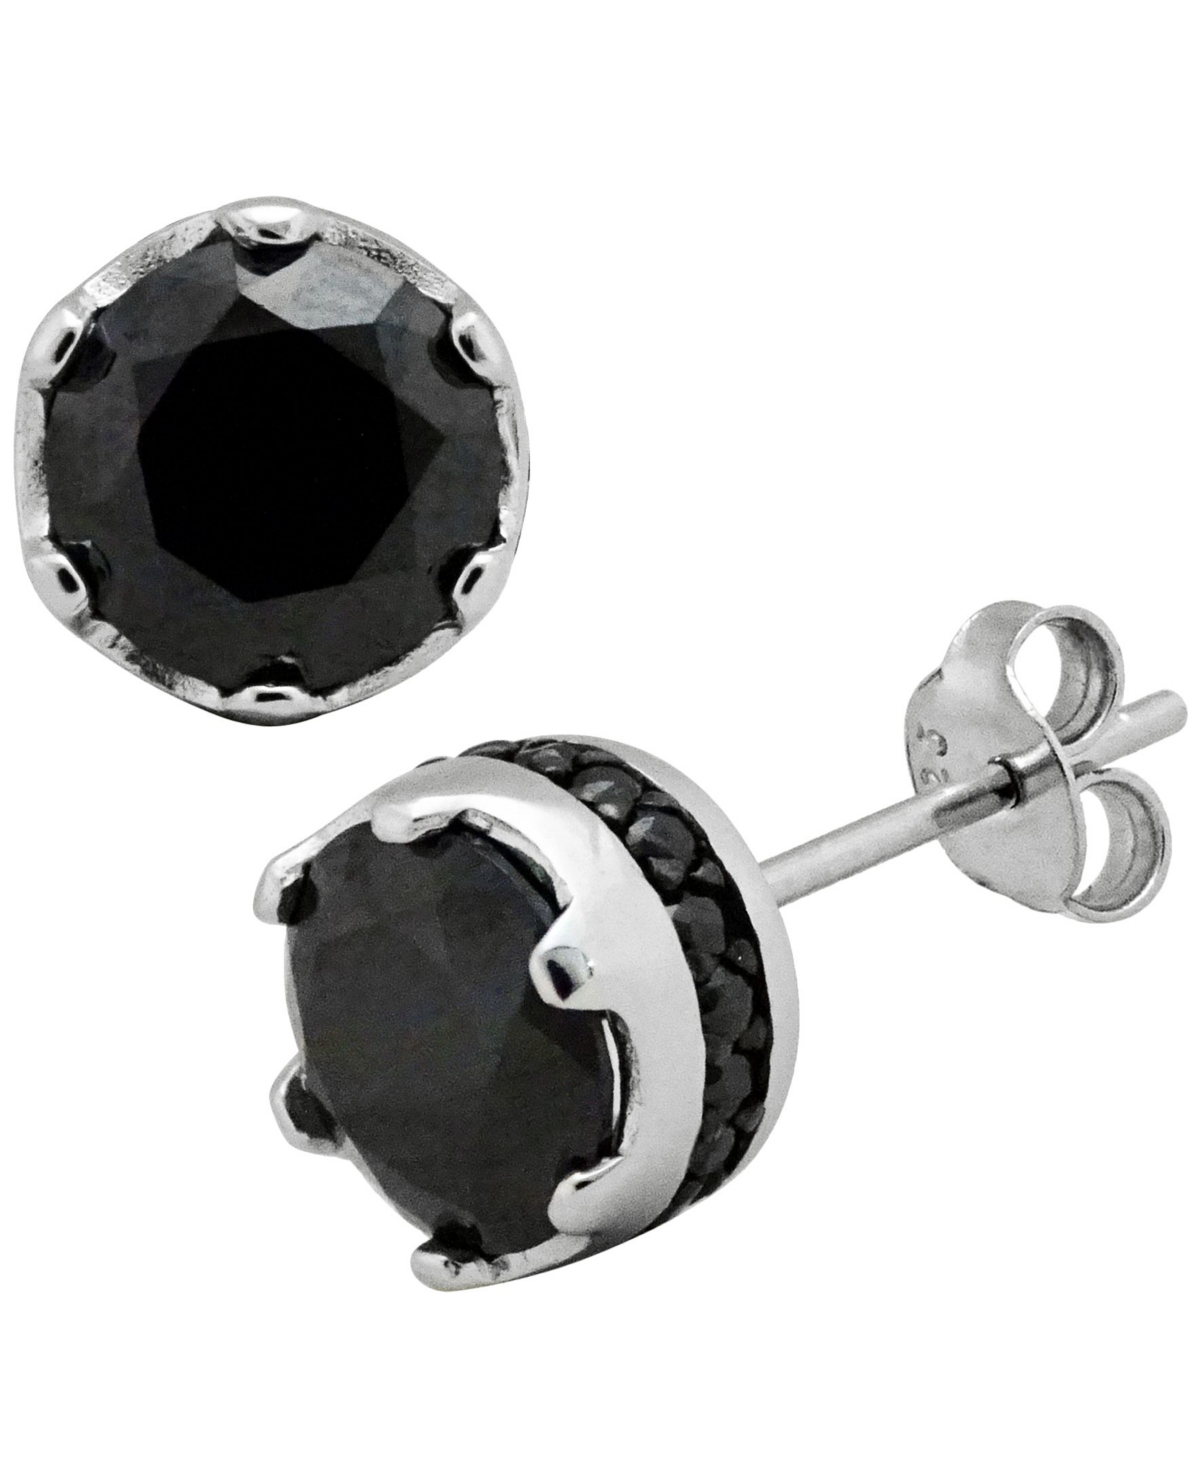 Sutton Sterling Silver Round Stud Earrings With Cubic Zirconia Trim - Black